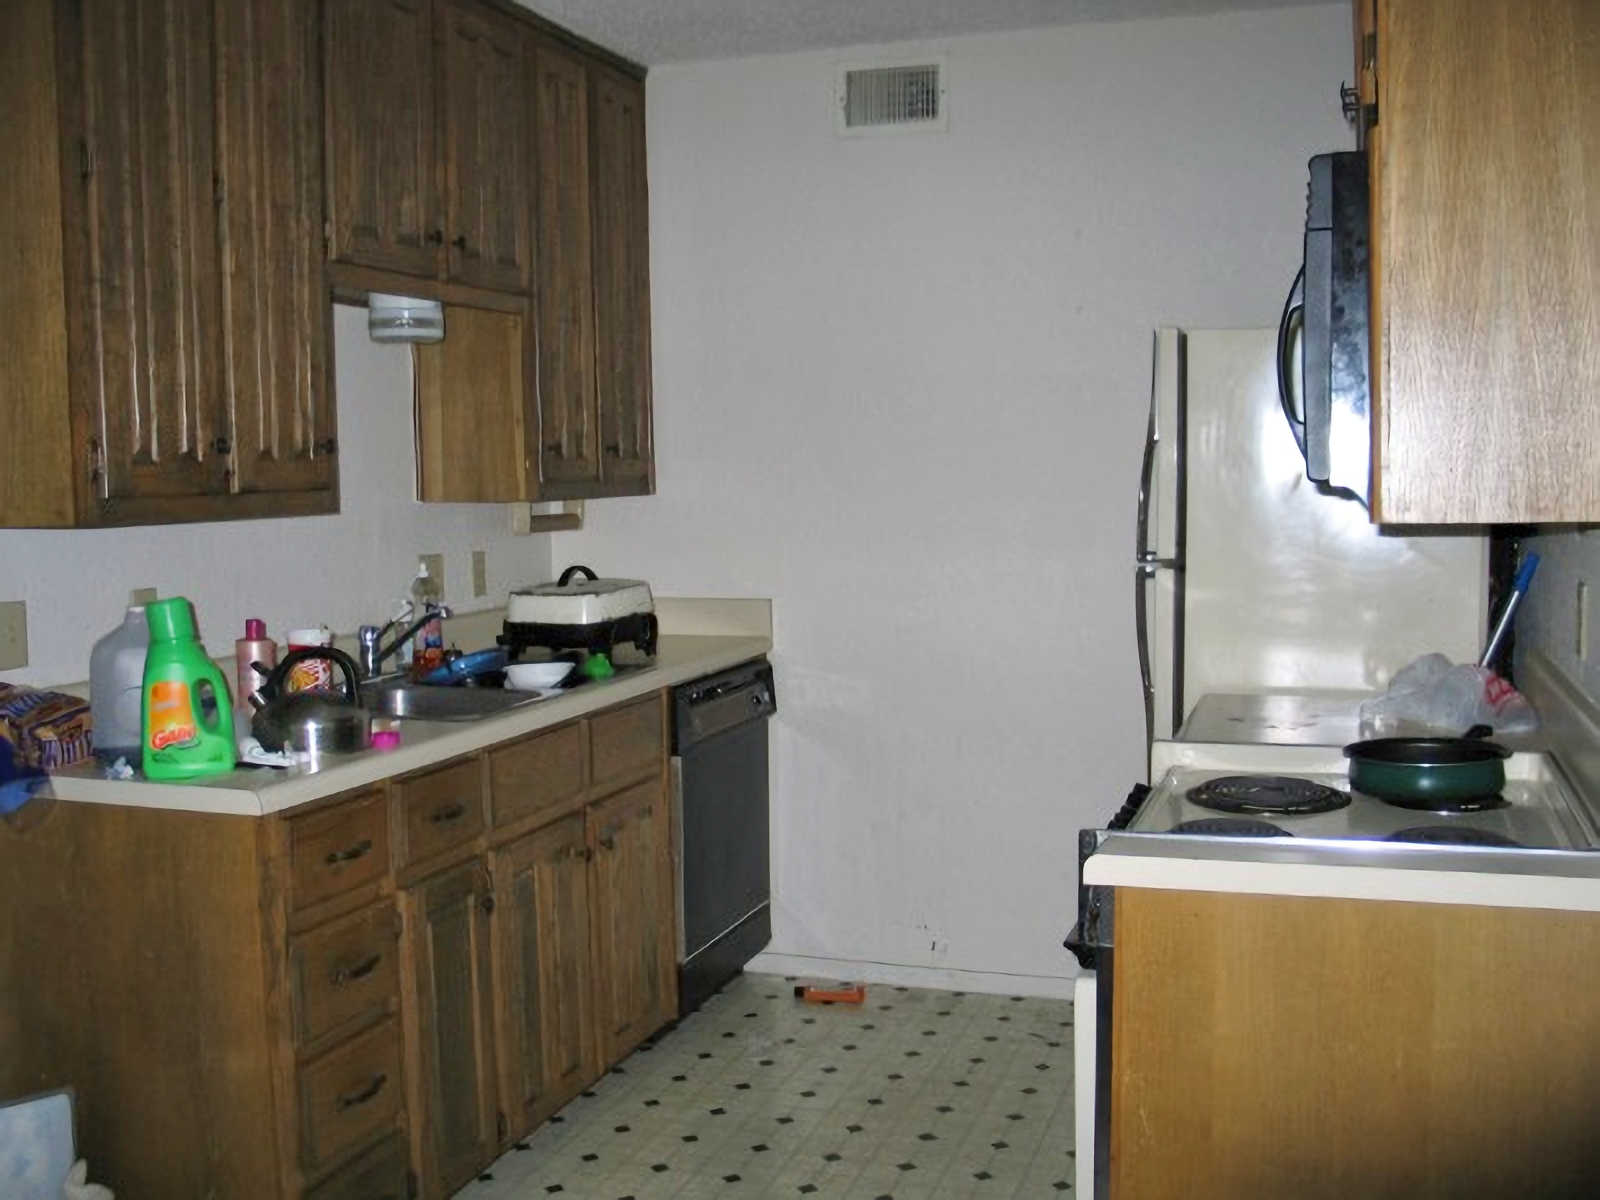 Small condo kitchen before remodel with old laminate countertops, outdated appliances, and stained wood cabinets